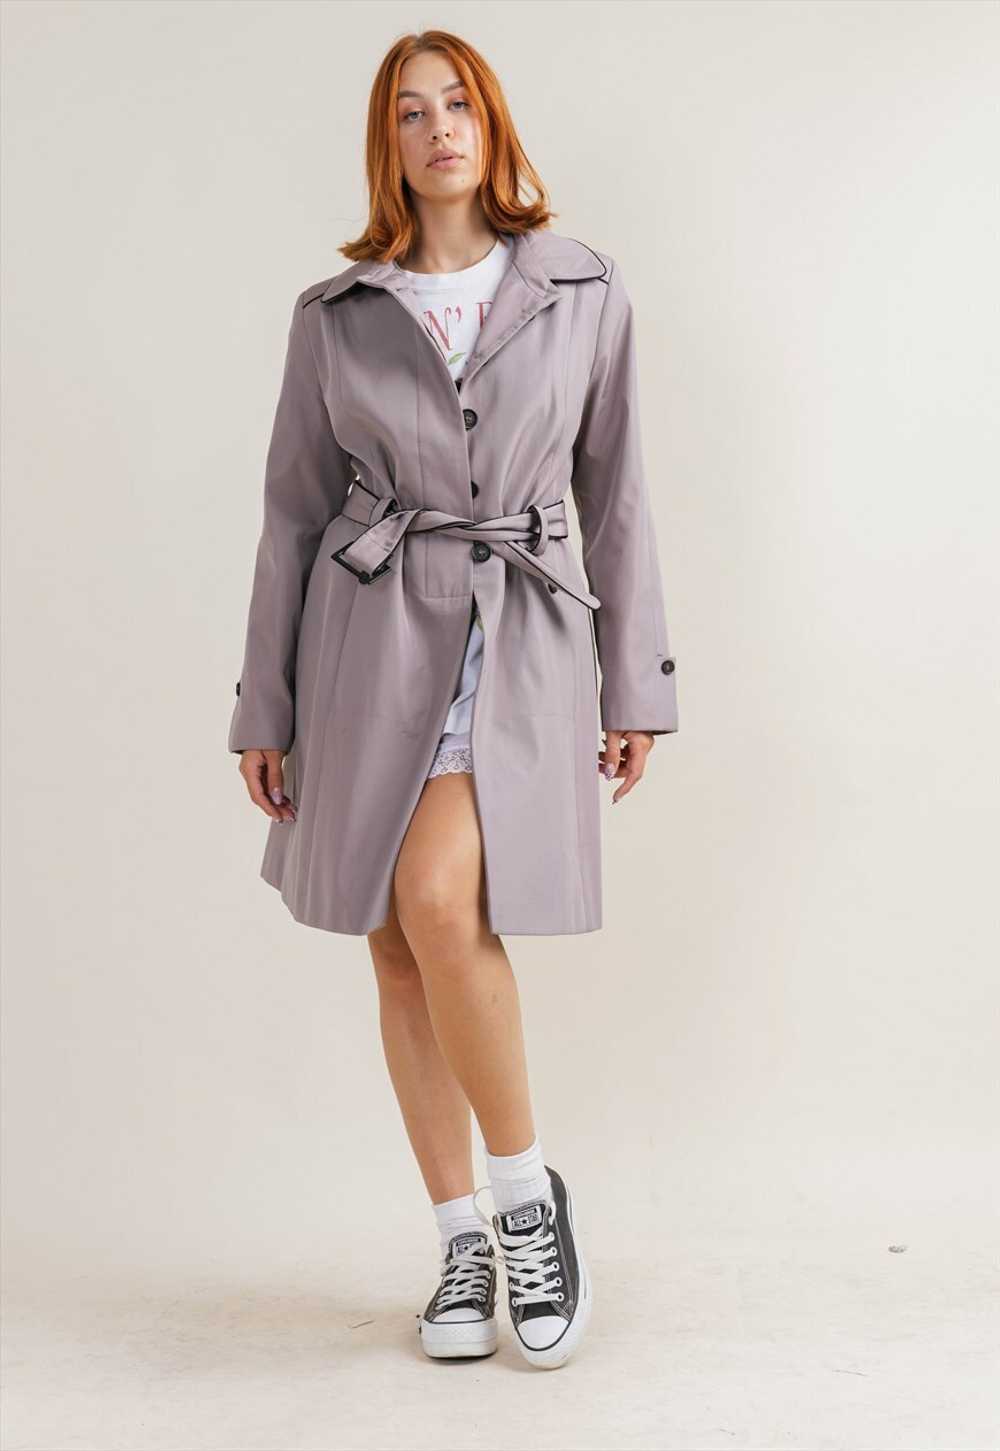 Vintage 80s Gray Mini Belted Trench Coat Women M - image 2